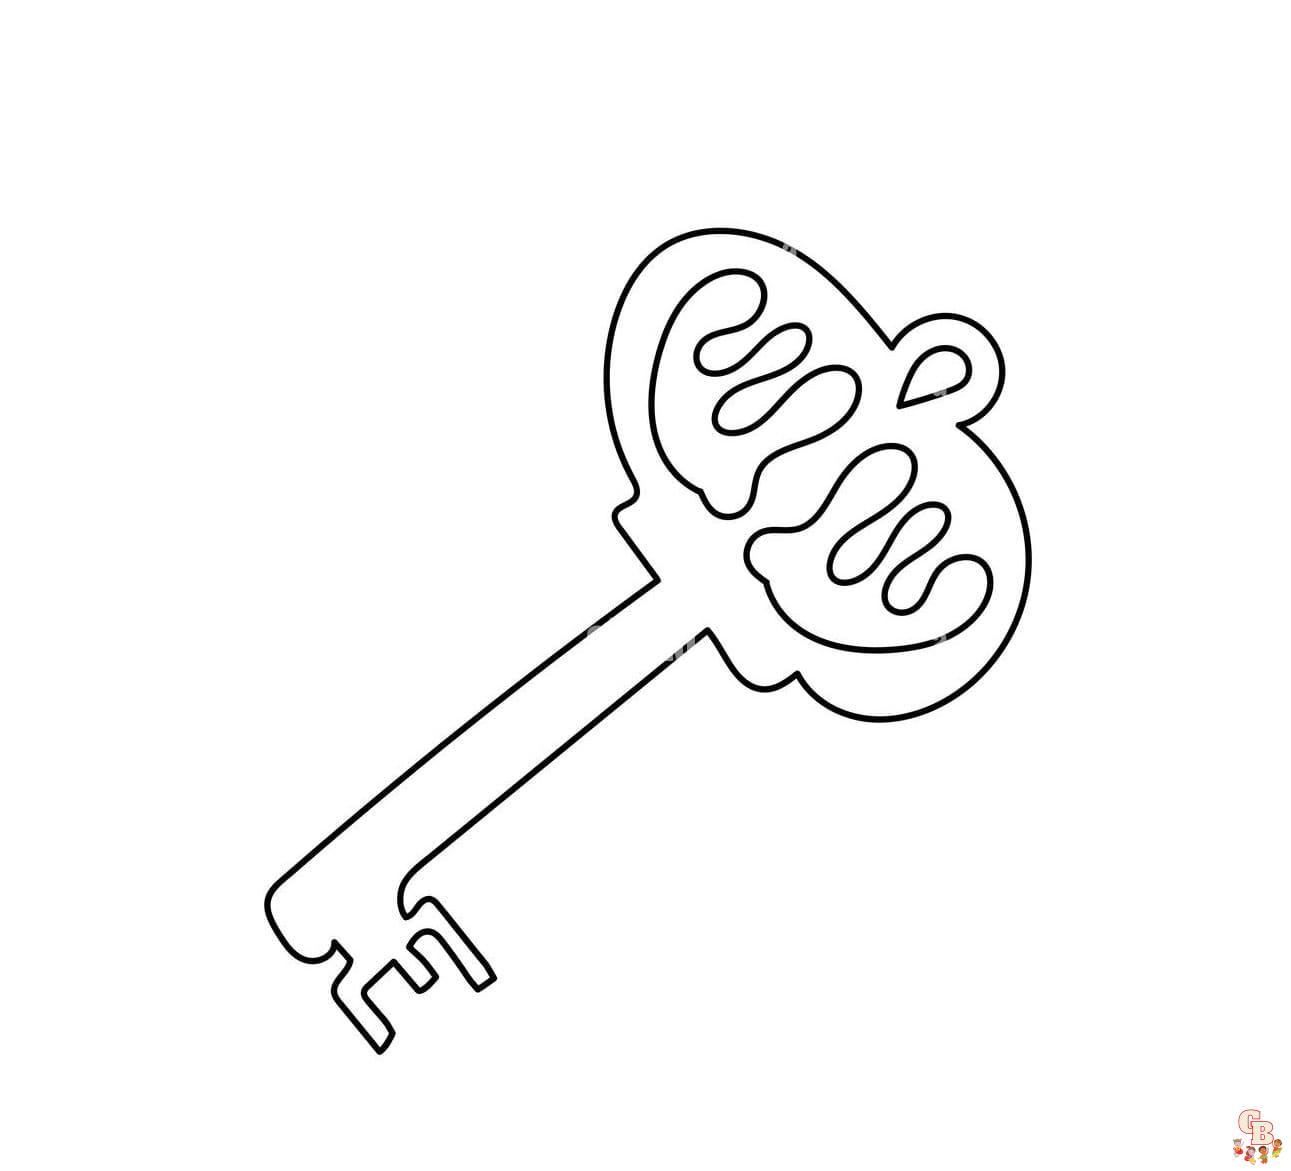 Printable key coloring pages free for kids and adults